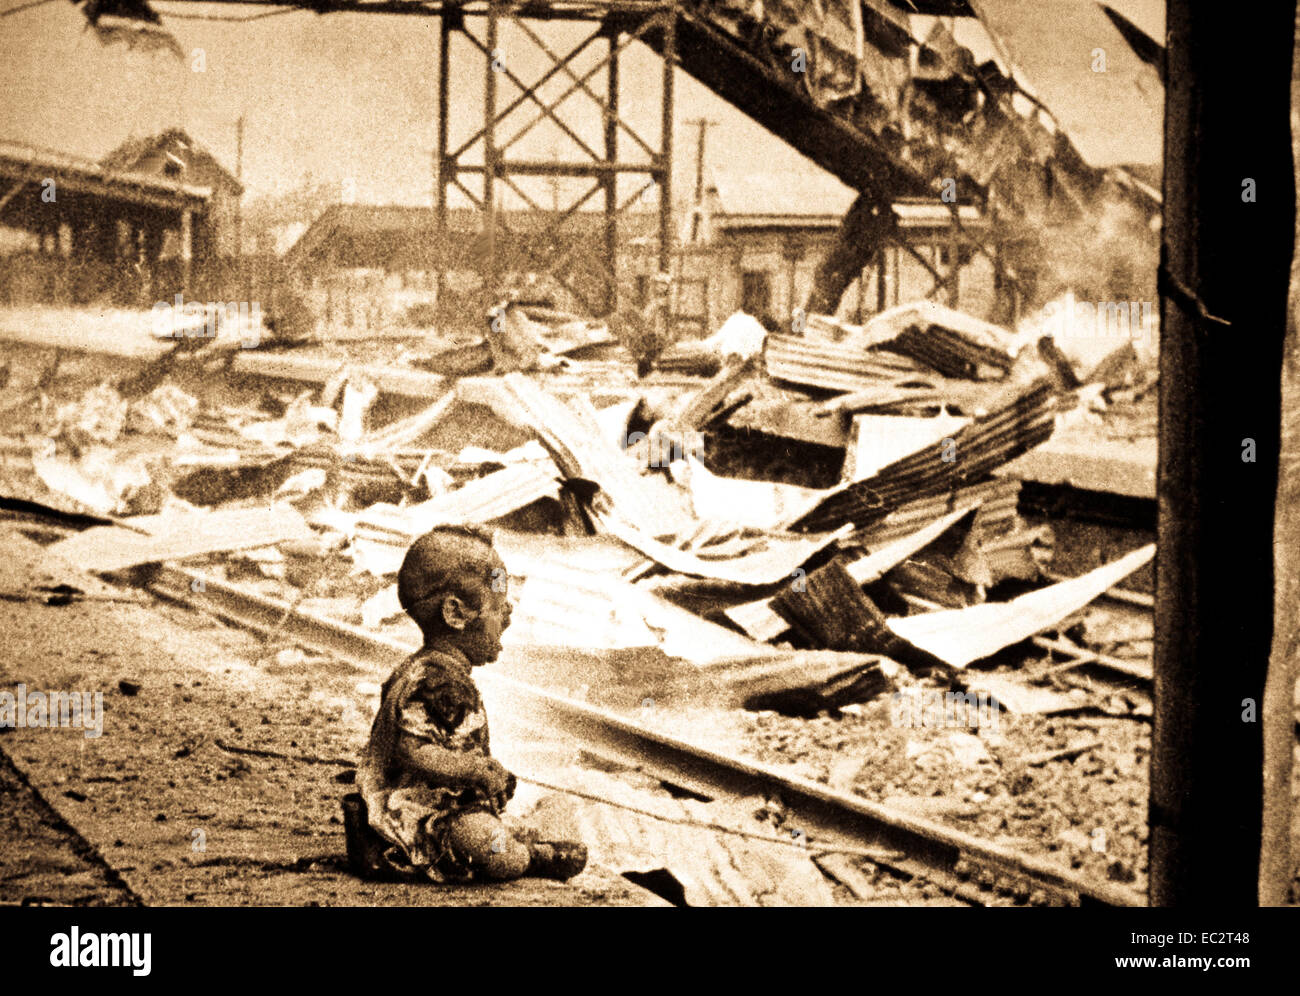 This terrified baby was almost the only human being left alive in Shanghai's South Station after brutal Japanese bombing.  China, August 28, 1937.  H.S. Wong. (OWI) Stock Photo